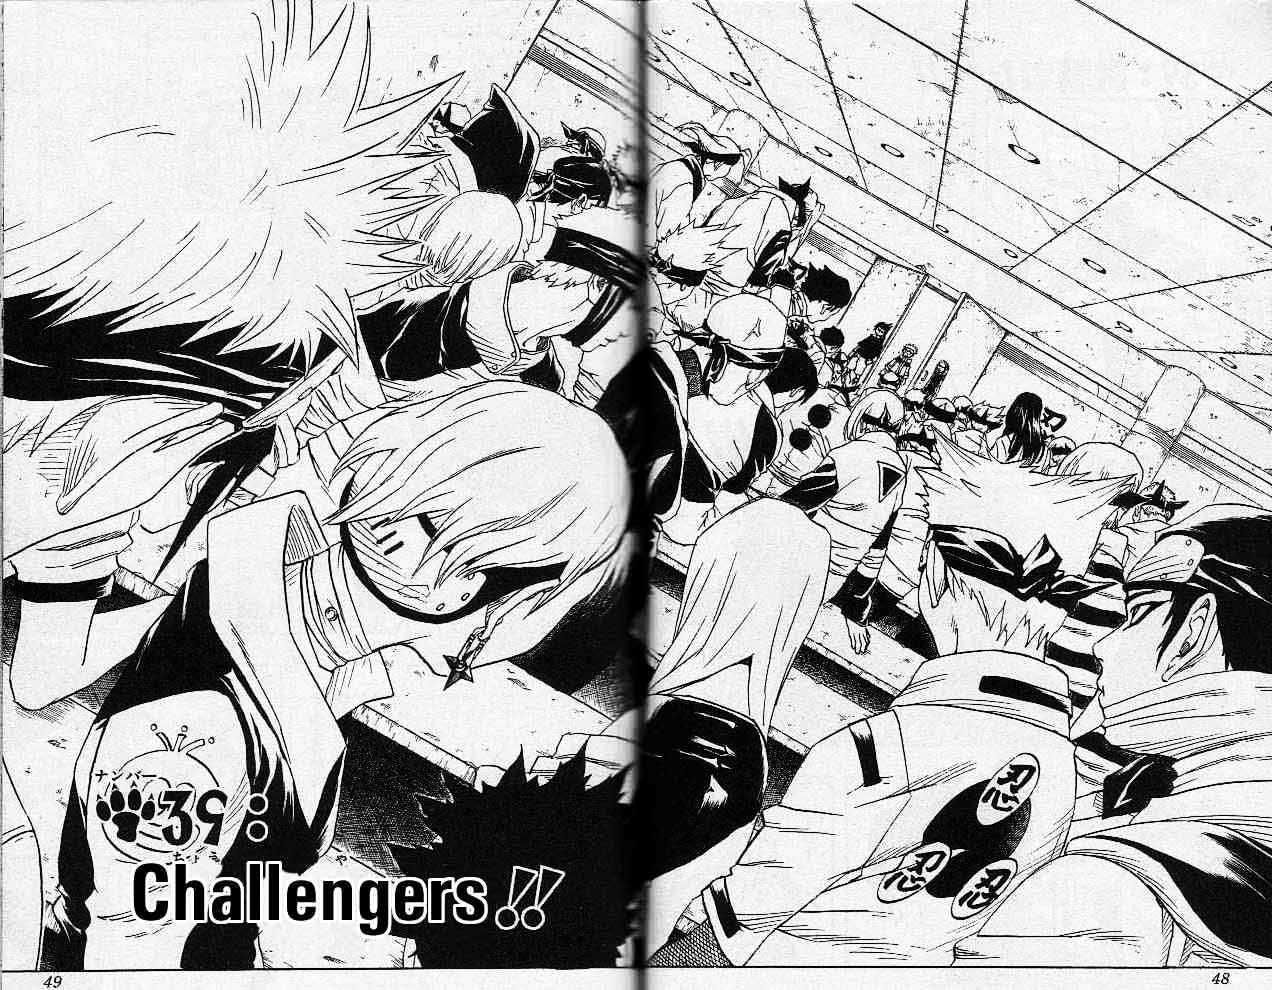 Vol.5 Chapter 39 – The Challengers!! | 3 page